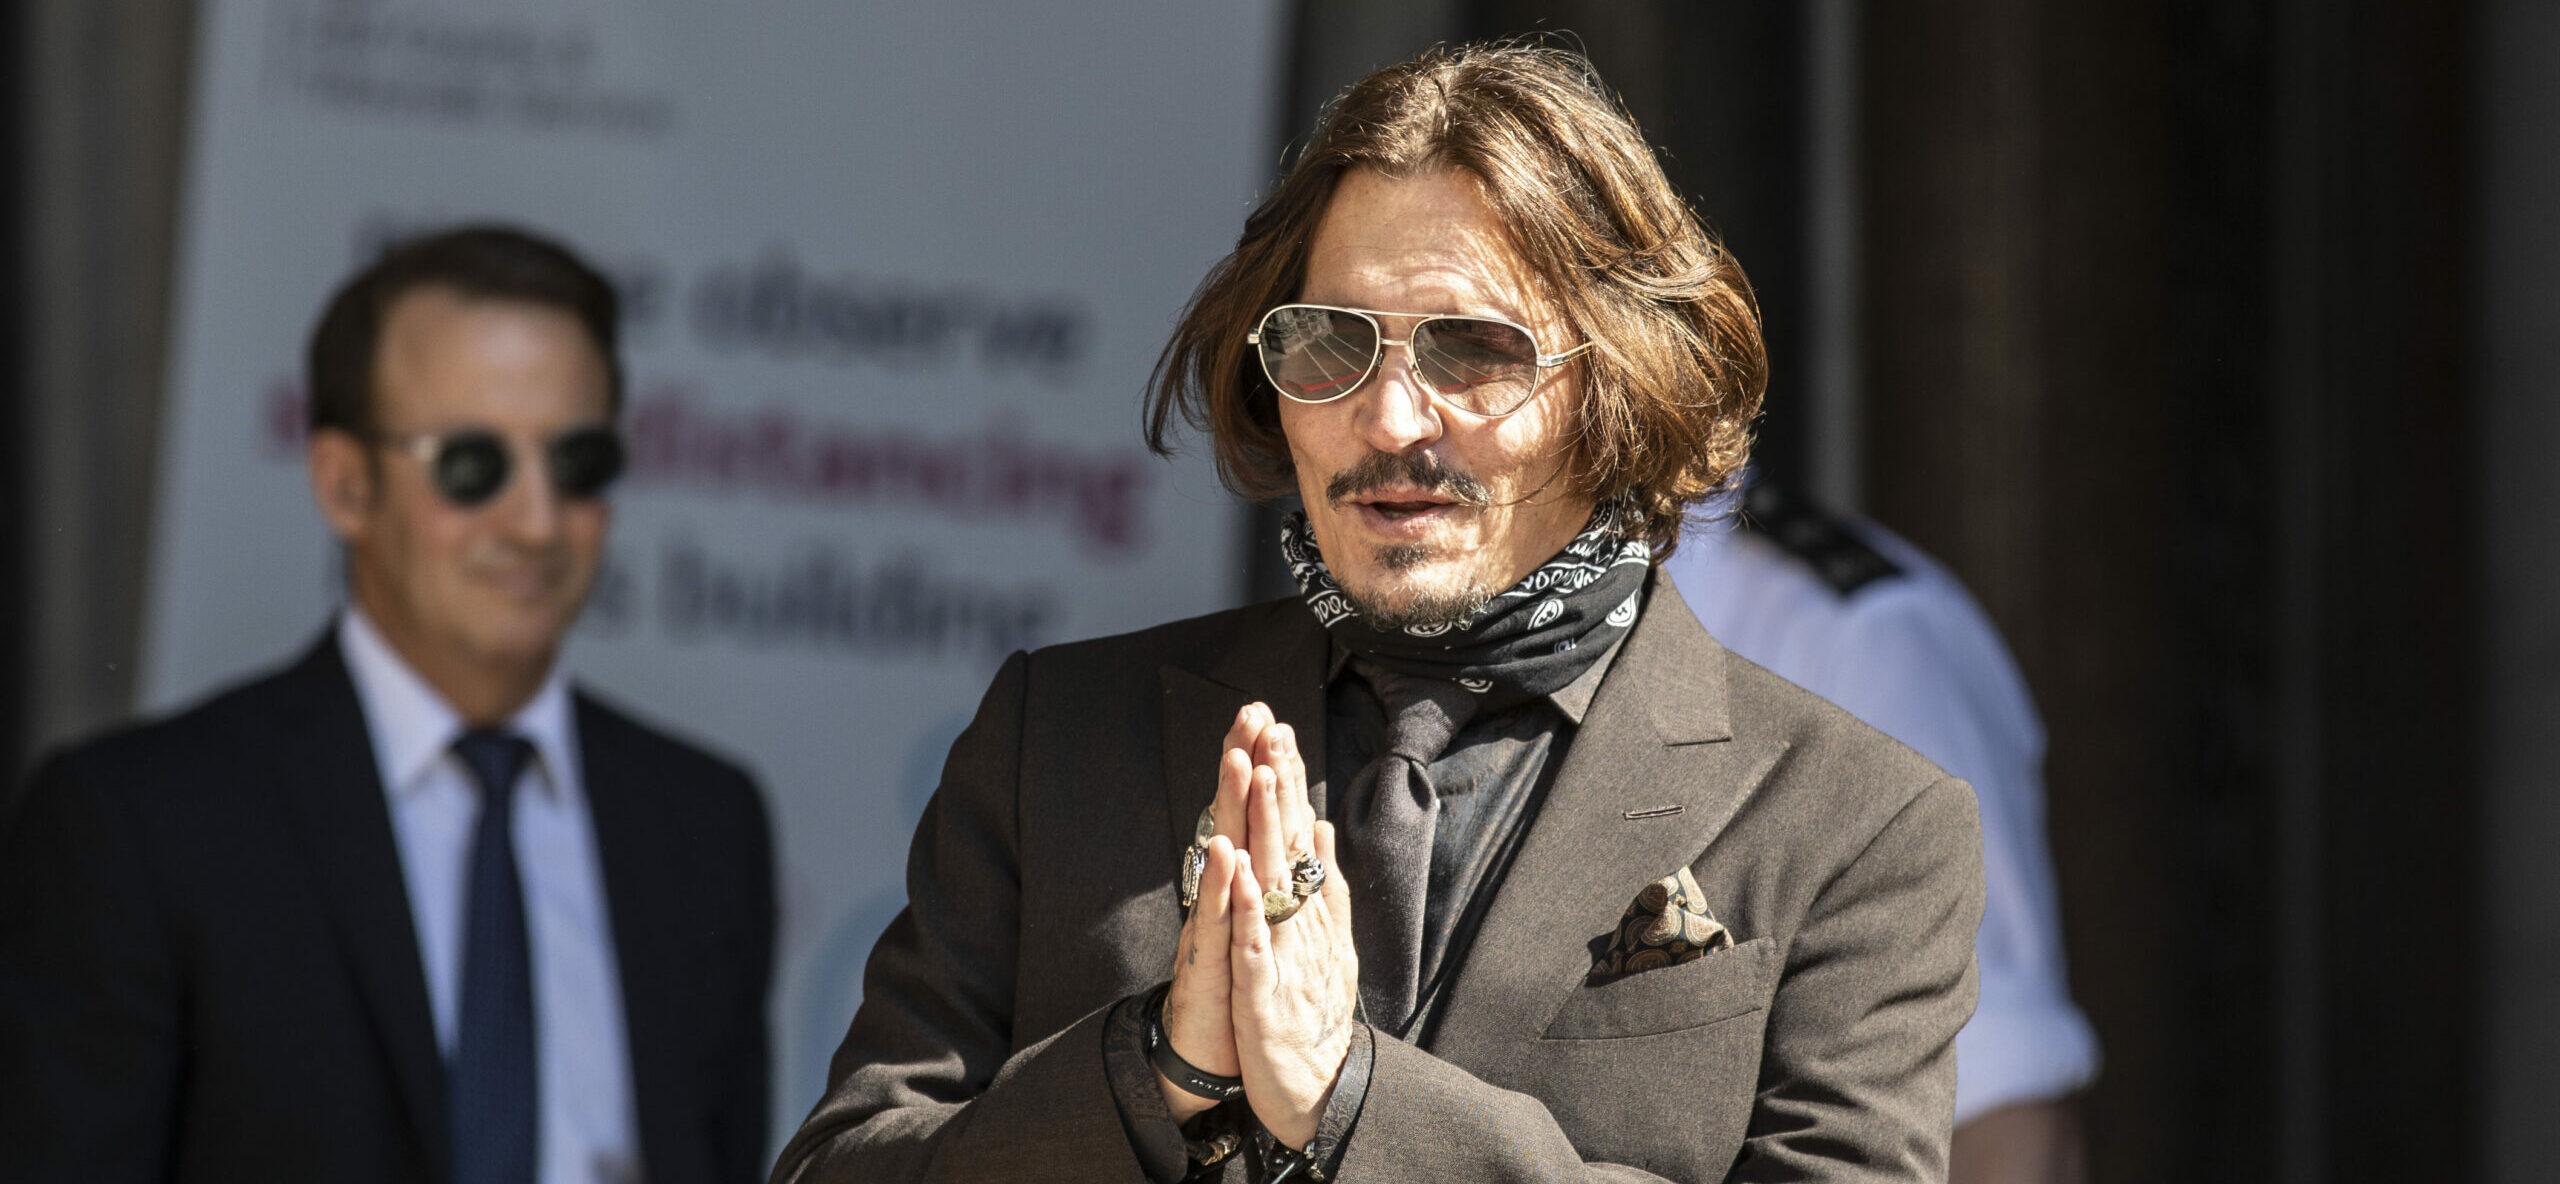 Actor Johnny Depp arrives at the High court in London as the legal action against The Sun newspaper continues.